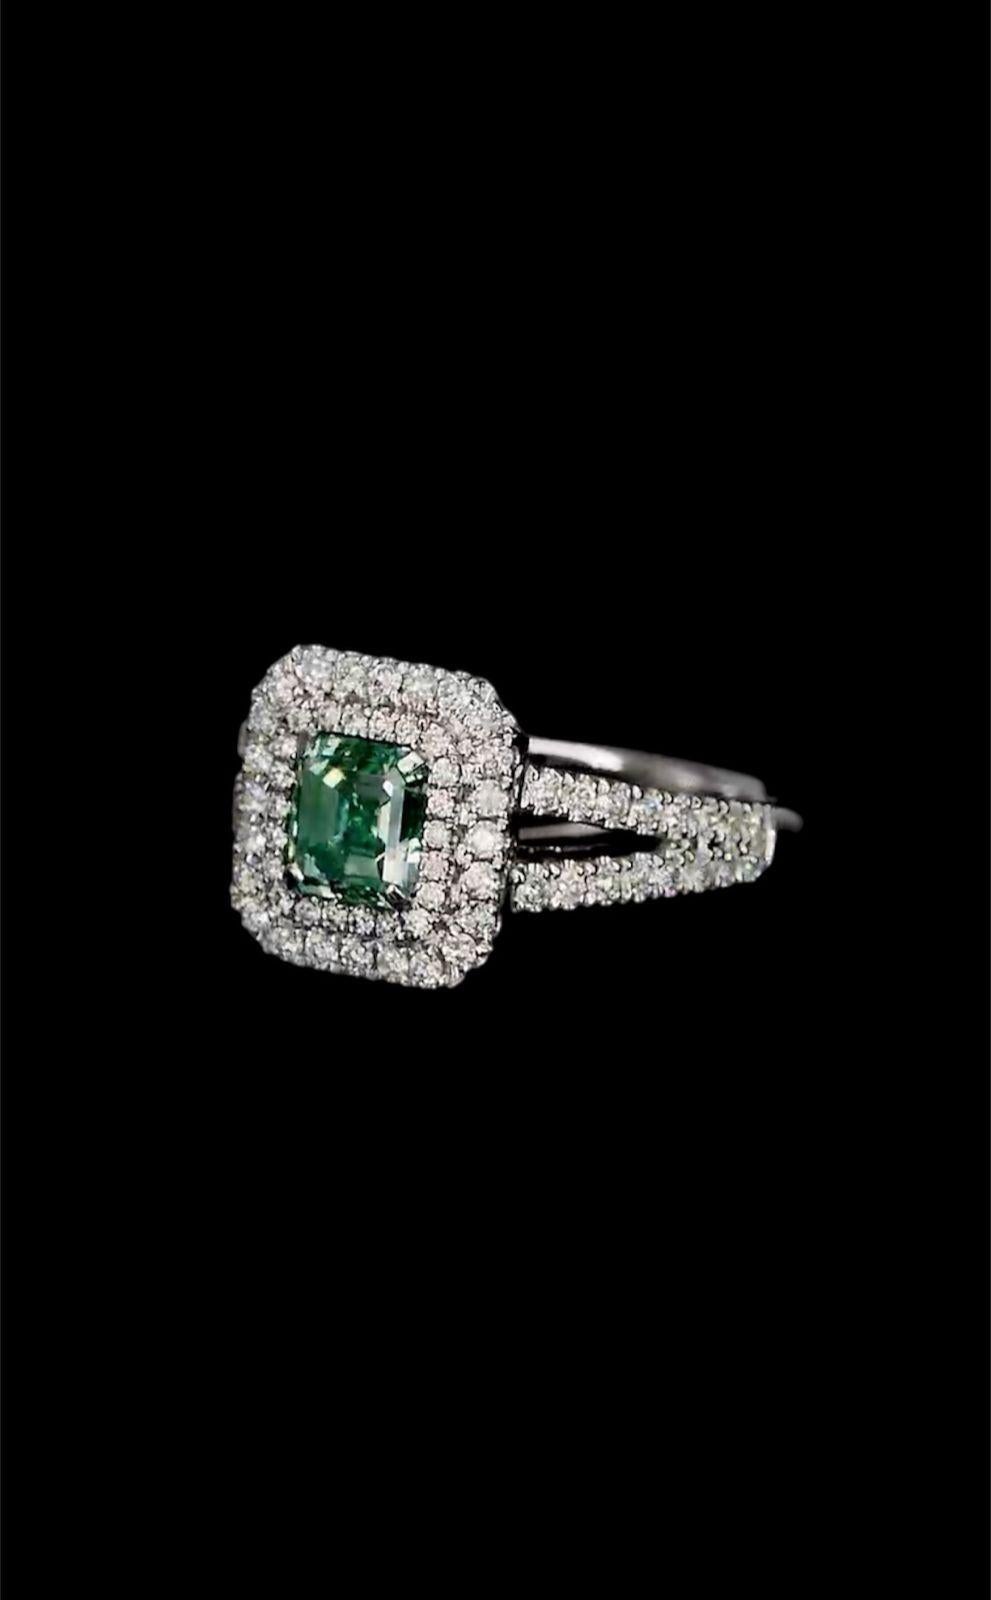 **100% NATURAL FANCY COLOUR DIAMOND JEWELRY**

✪ Jewelry Details ✪

♦ MAIN STONE DETAILS

➛ Stone Shape: Emerald
➛ Stone Color: Fancy Green
➛ Stone Clarity: VS
➛ Stone Weight: 1.00 carats
➛ AGL certified

♦ SIDE STONE DETAILS

➛ Side white diamonds